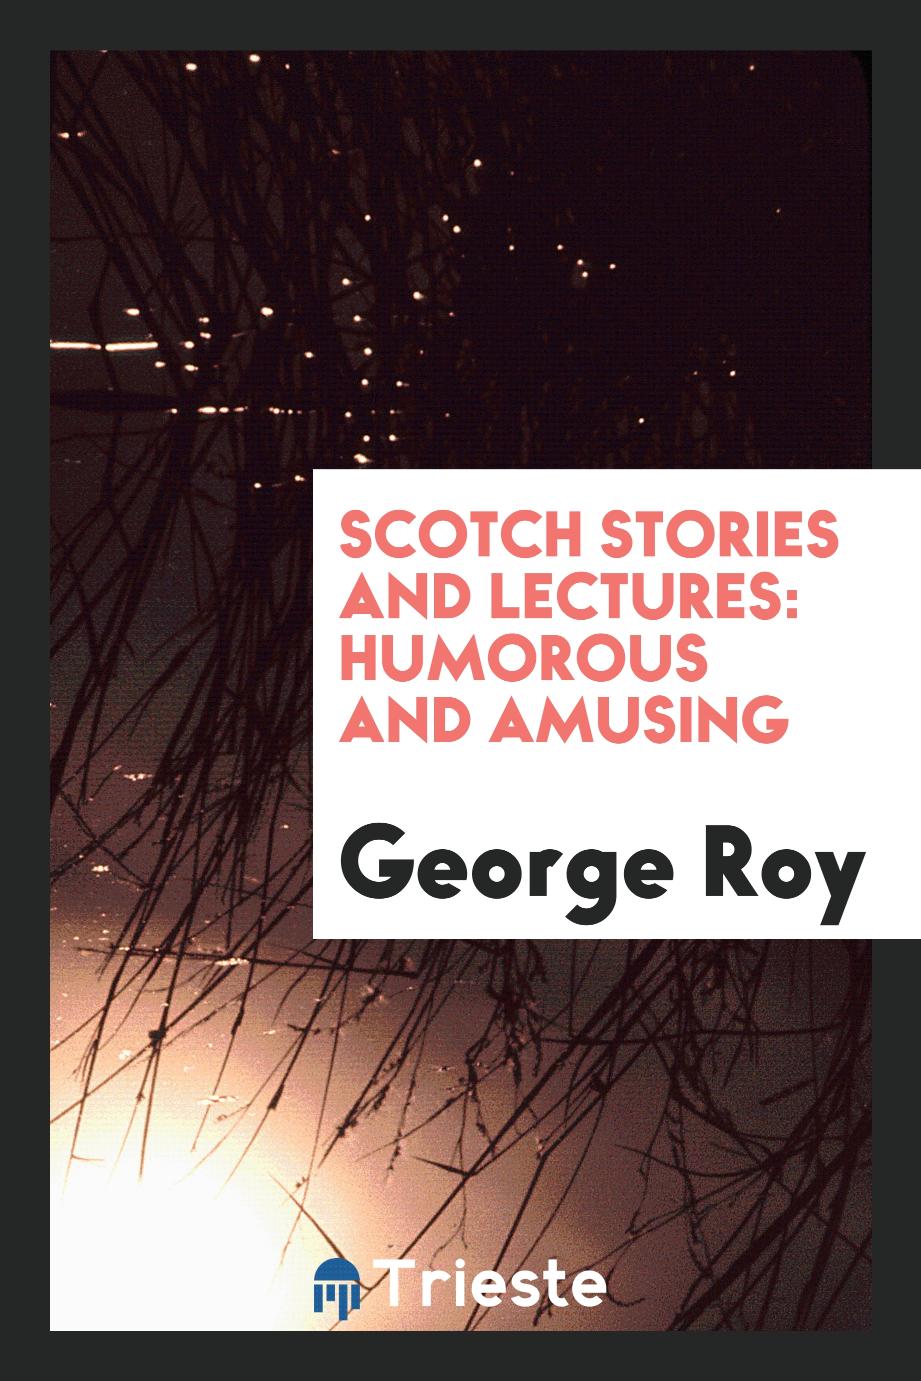 Scotch Stories and Lectures: Humorous and Amusing